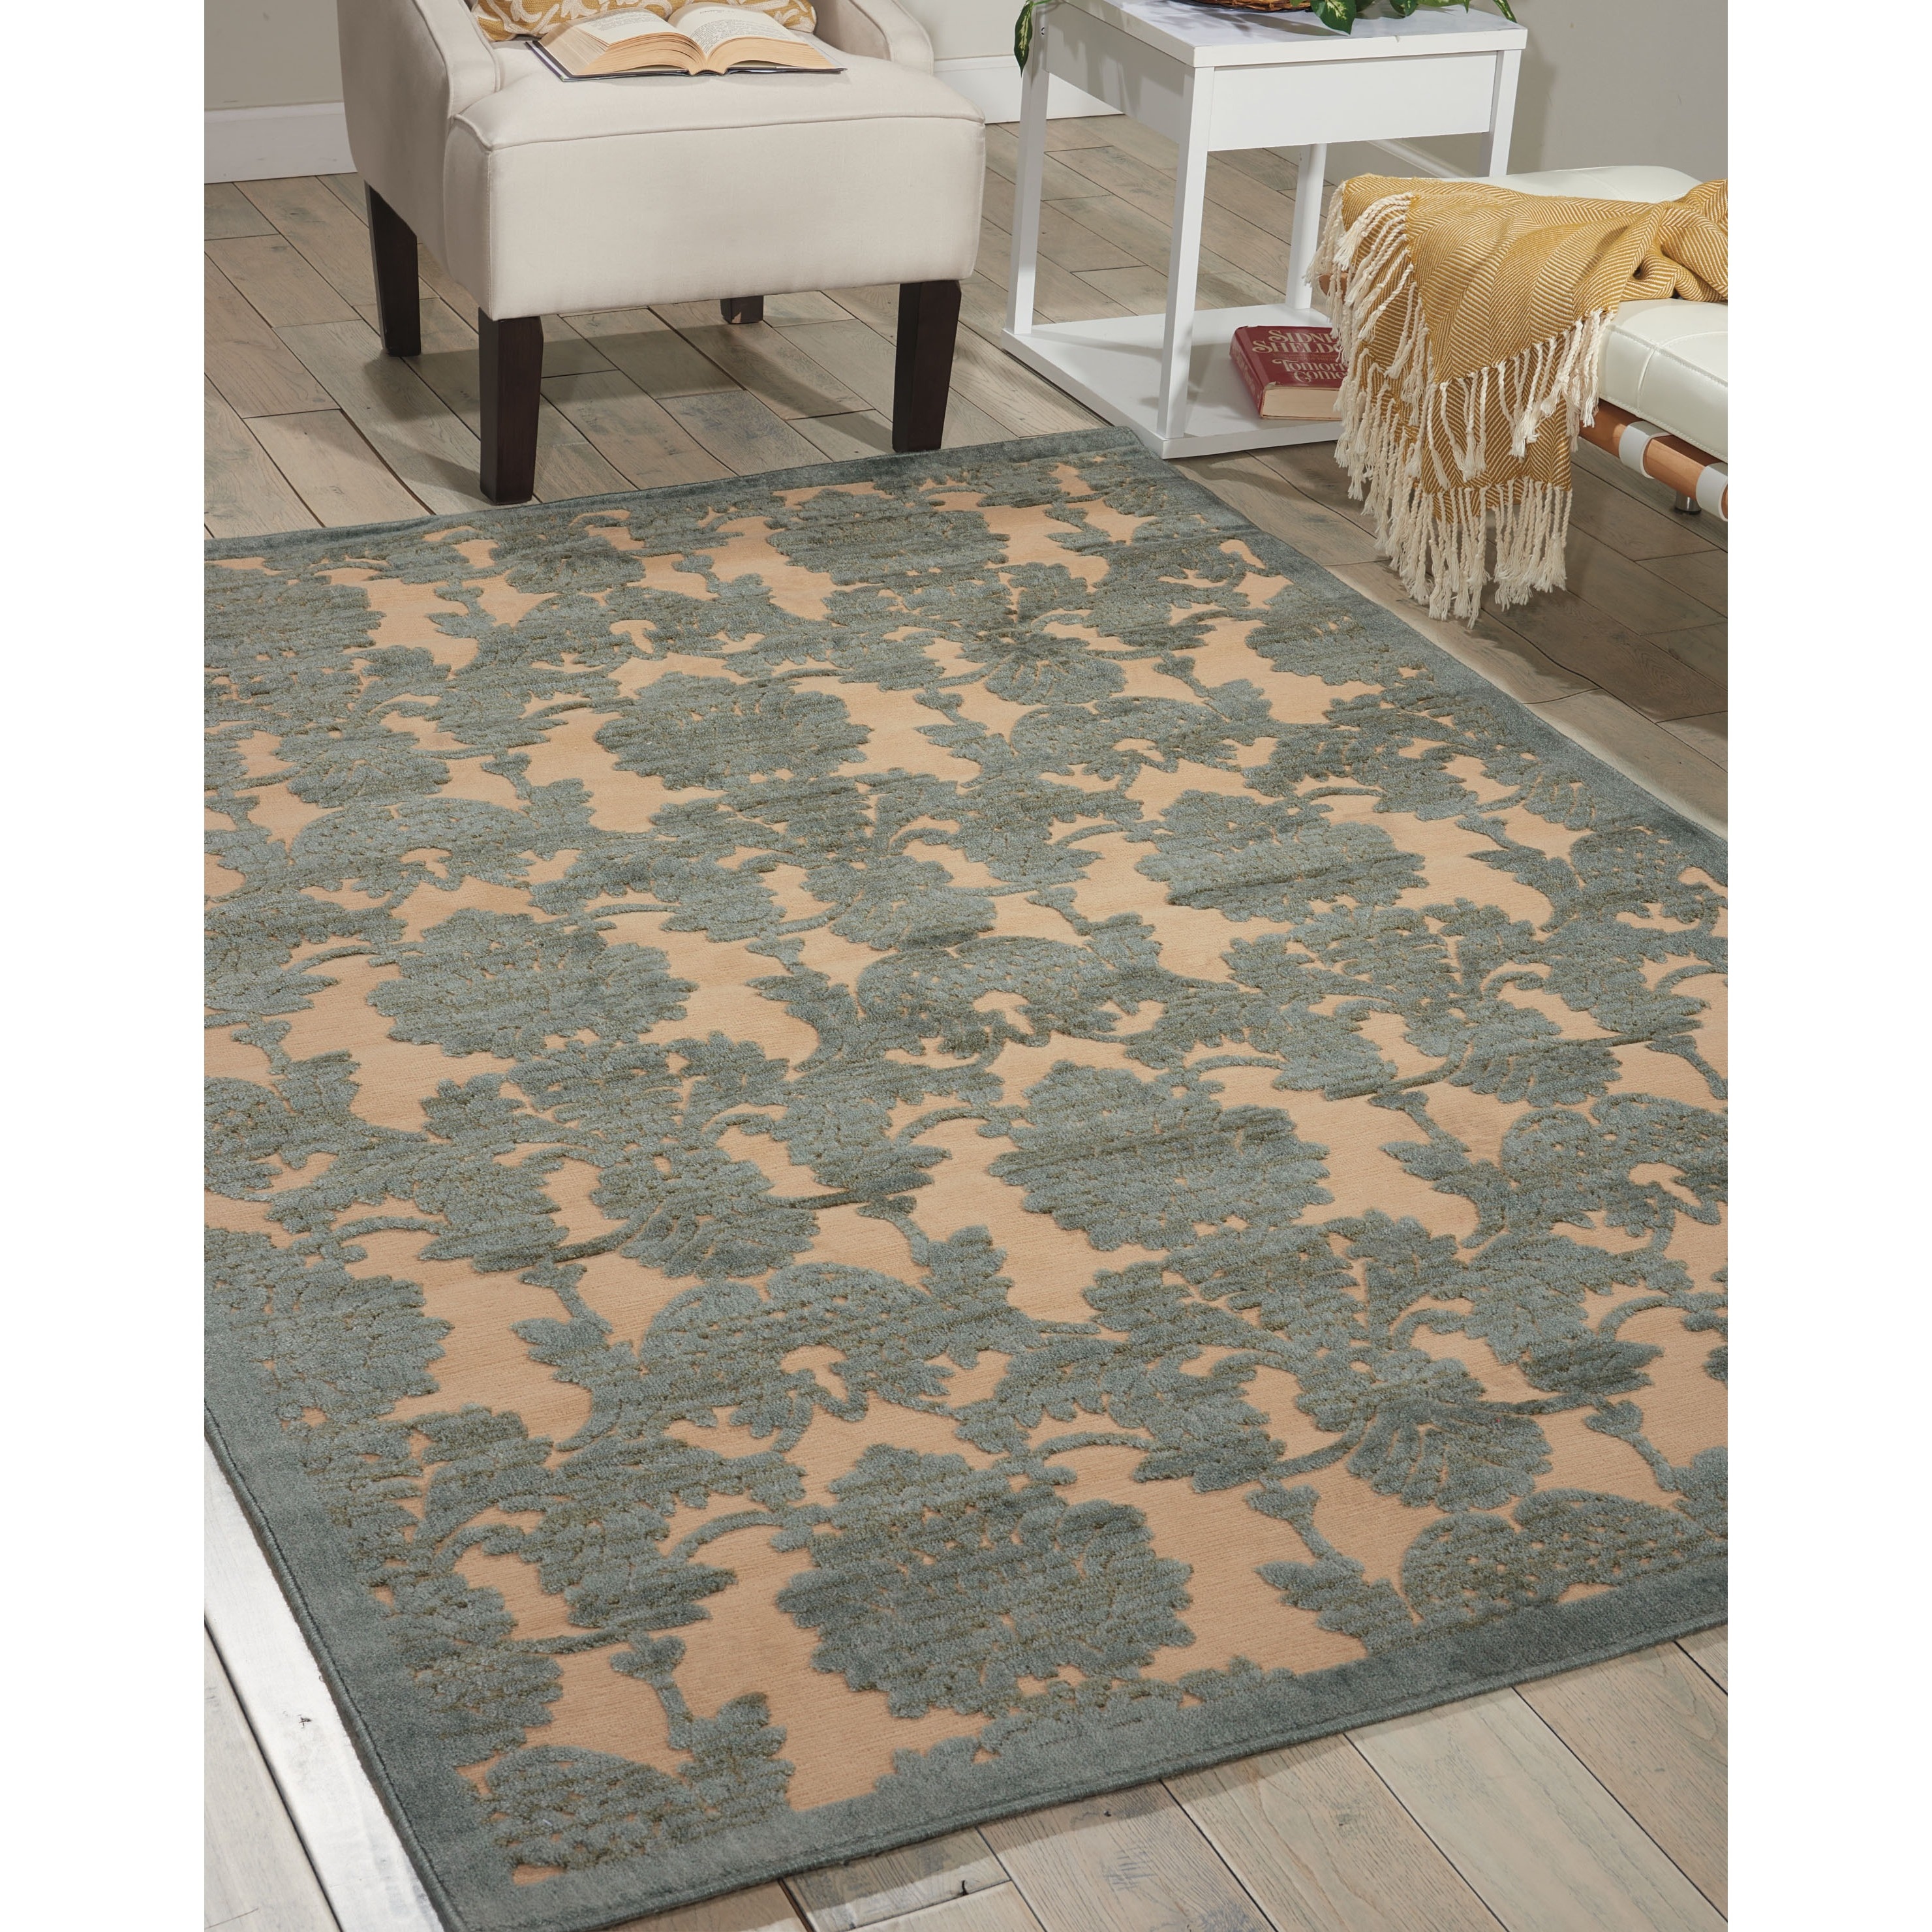 Graphic Illusions Damask Teal Rug (79 x 1010) Today $393.99 4.0 (1